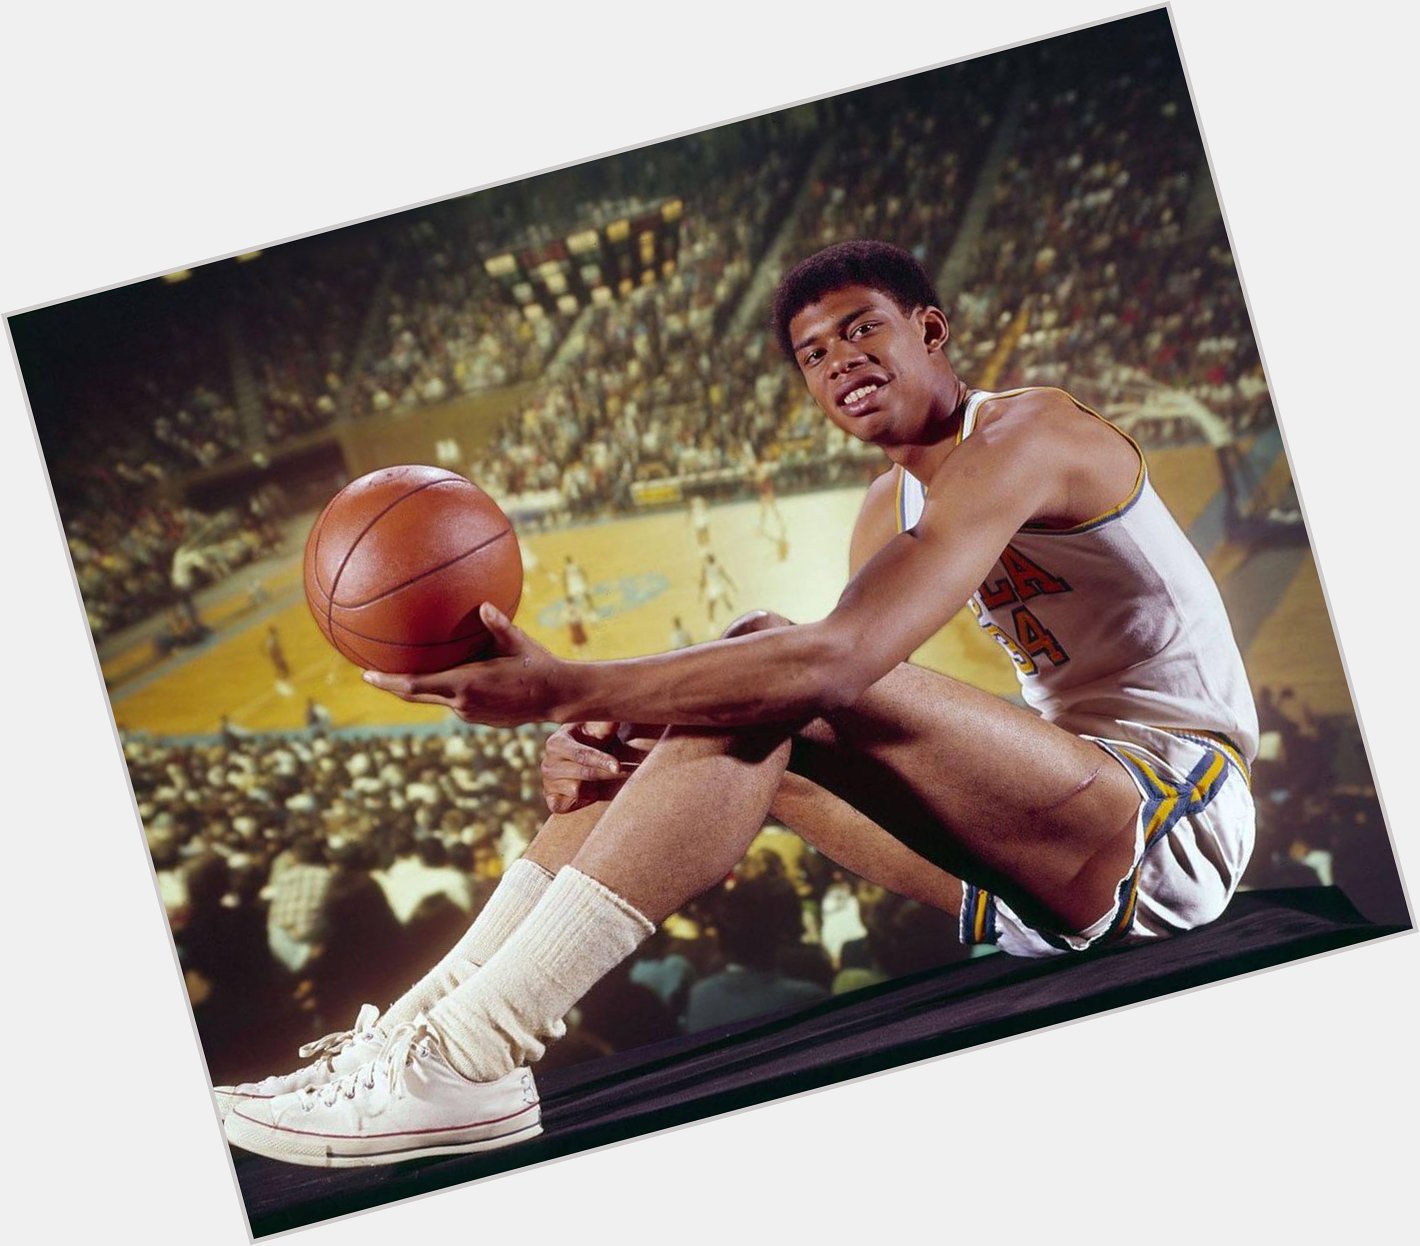 Happy Birthday to Kareem Abdul-Jabbar who turns 72 today! Pictured here when he was playing basketball at UCLA. 